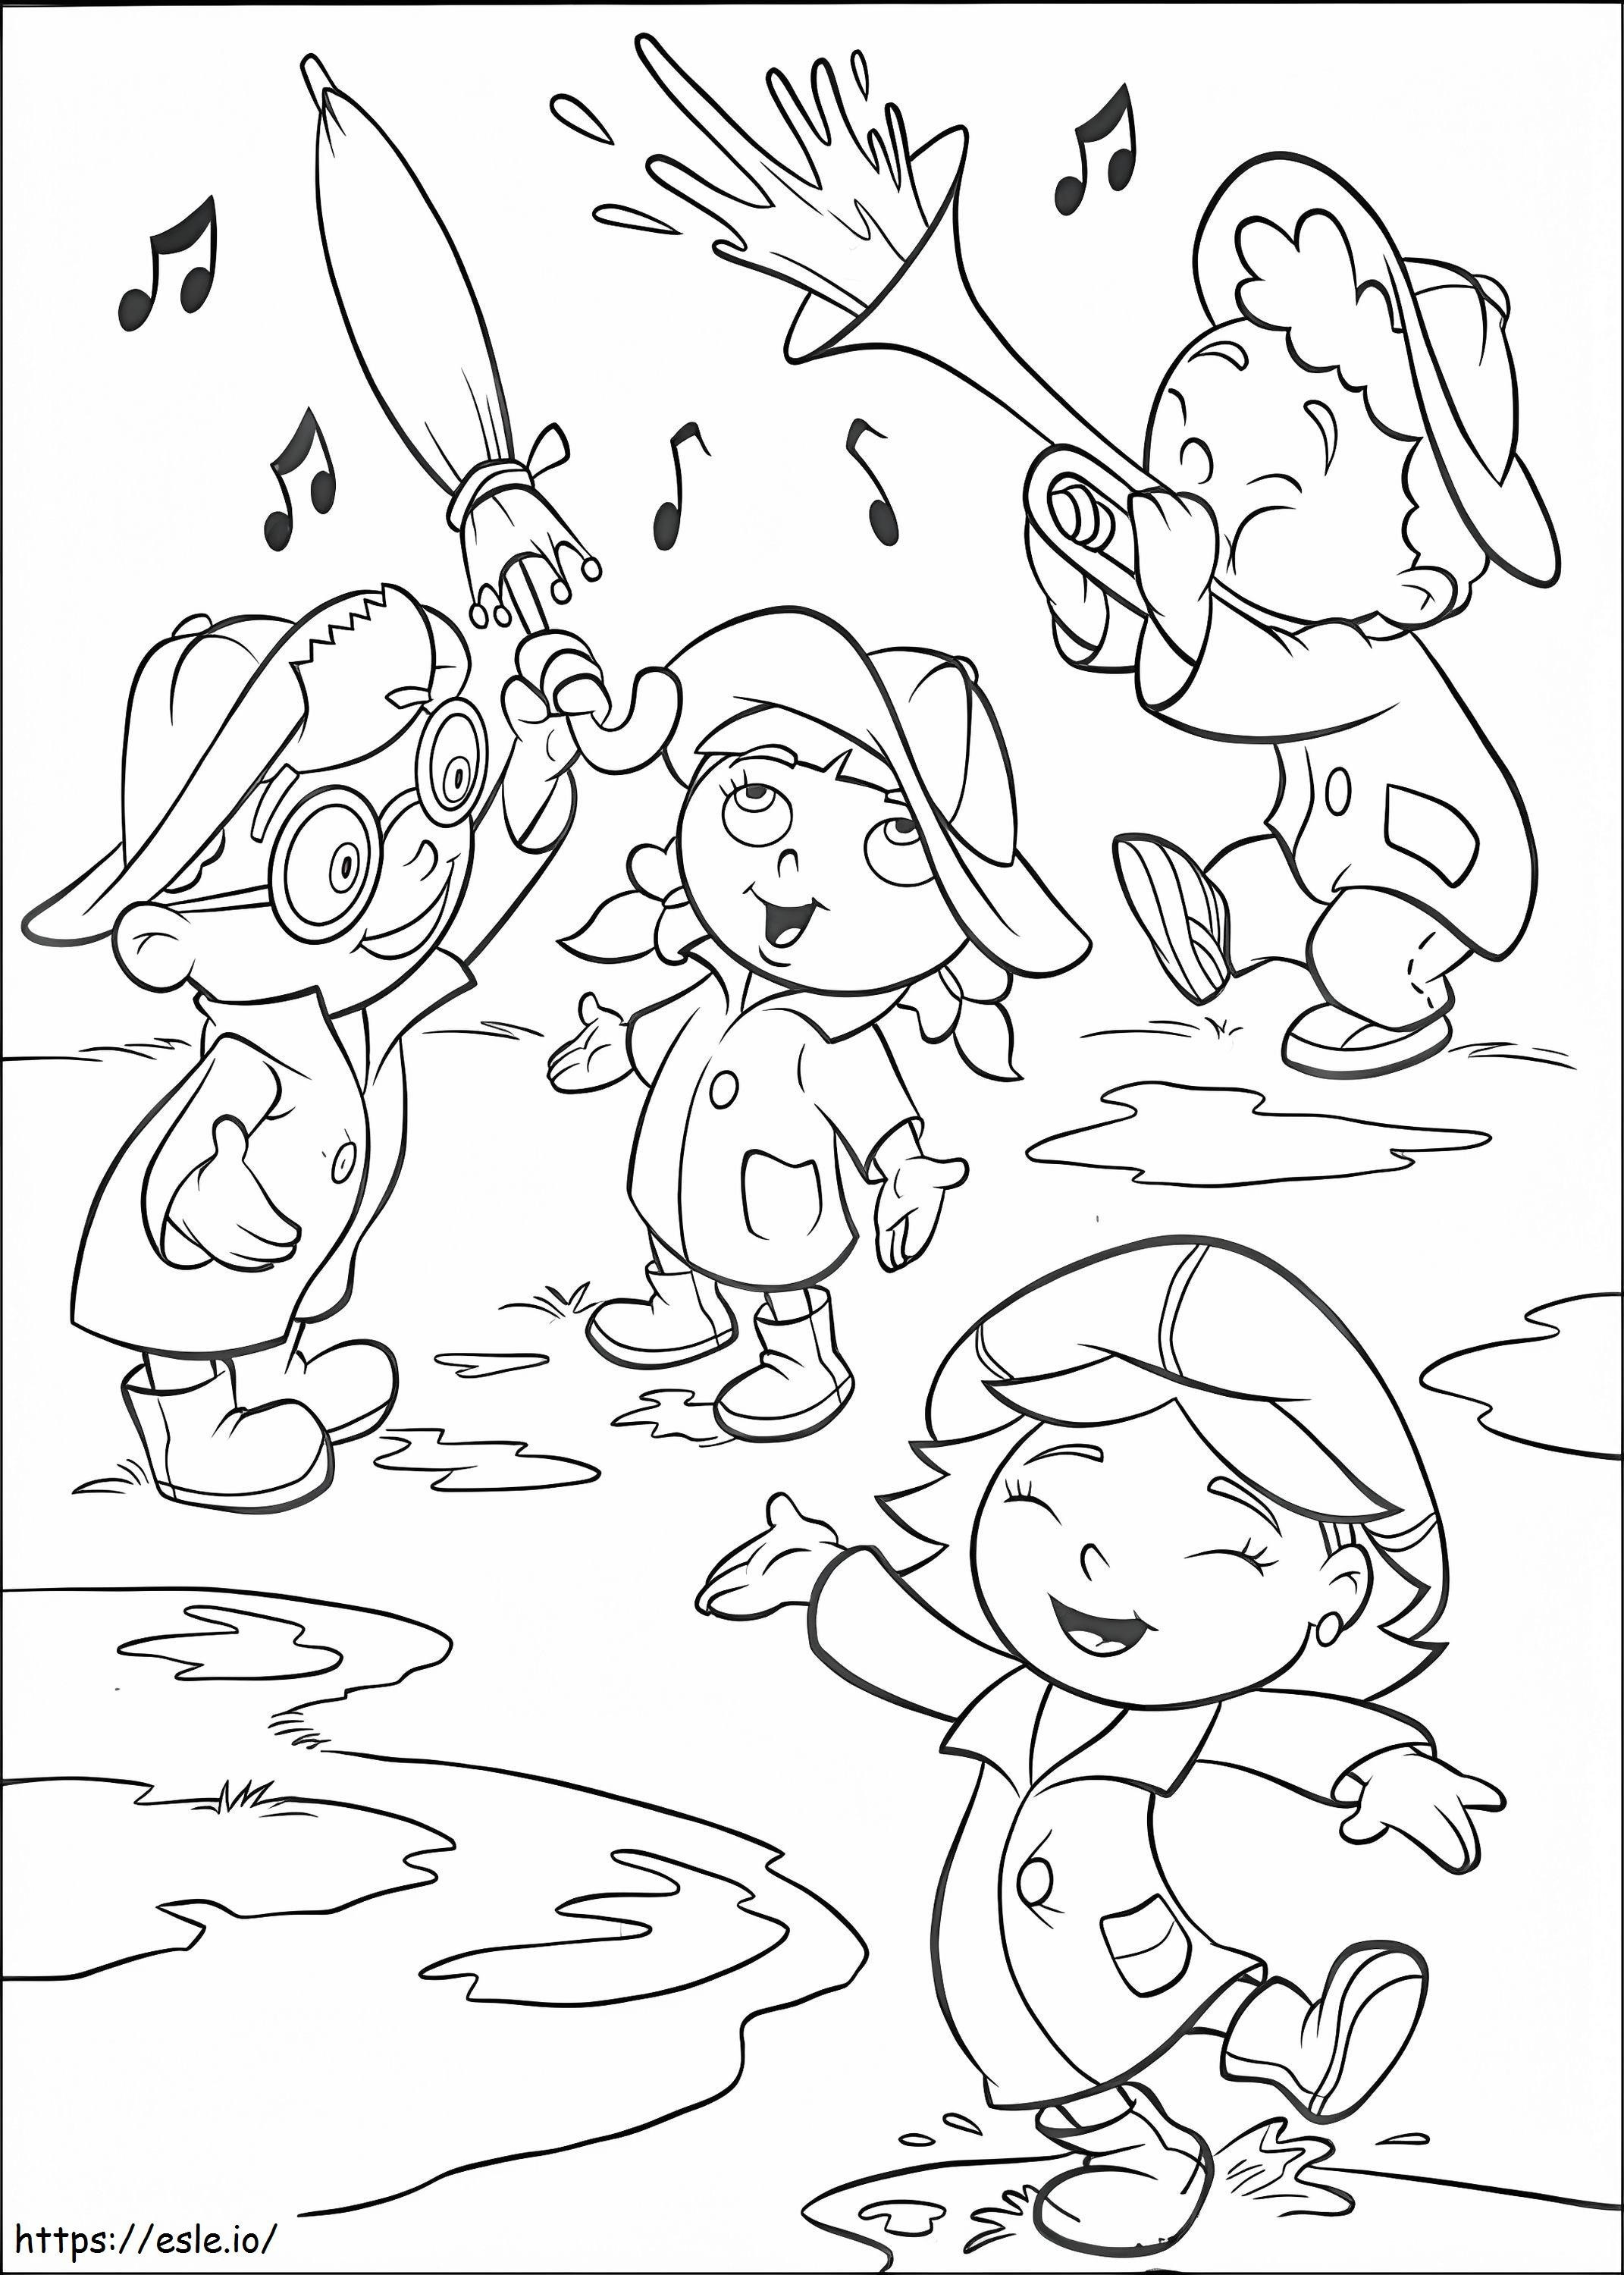 Little Einsteins 1 coloring page